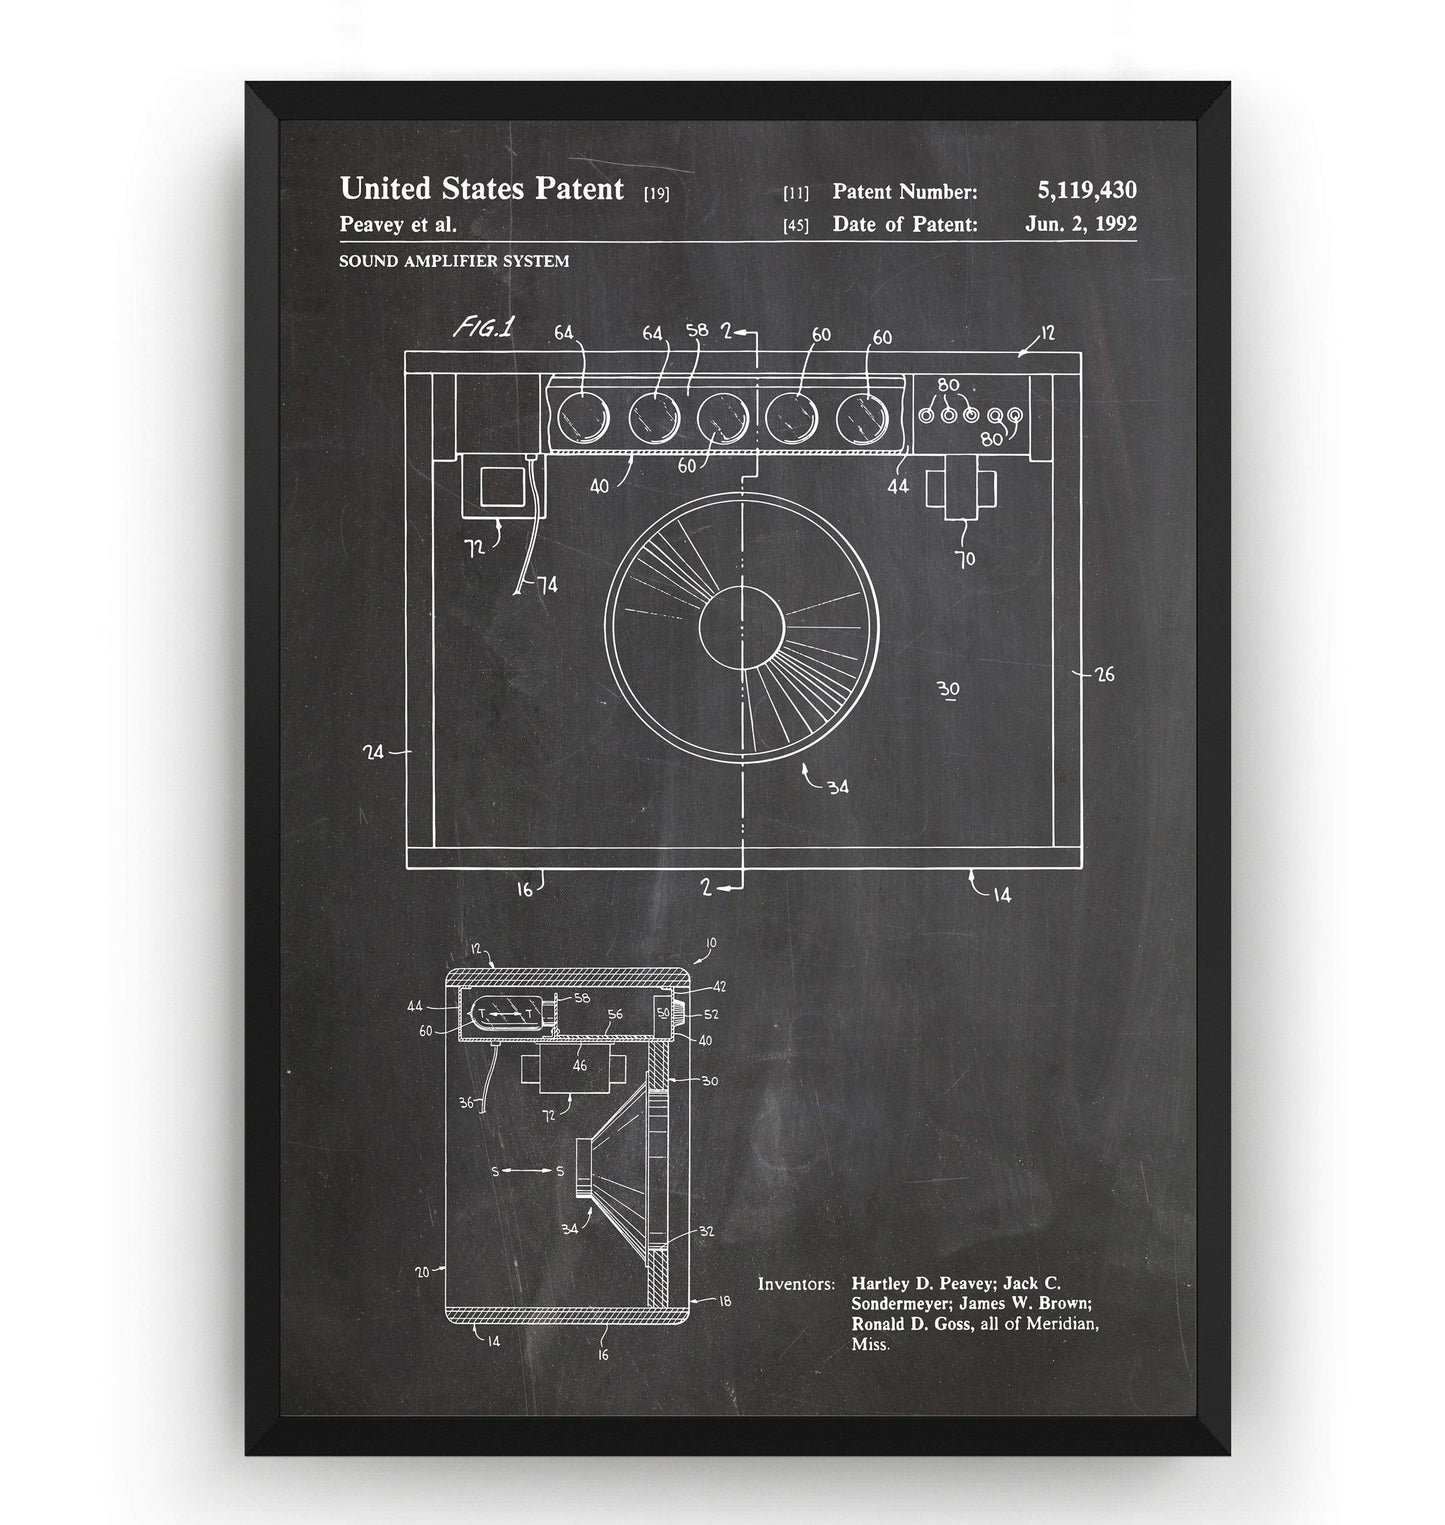 Sound Amplifier System 1992 Patent Print - Magic Posters